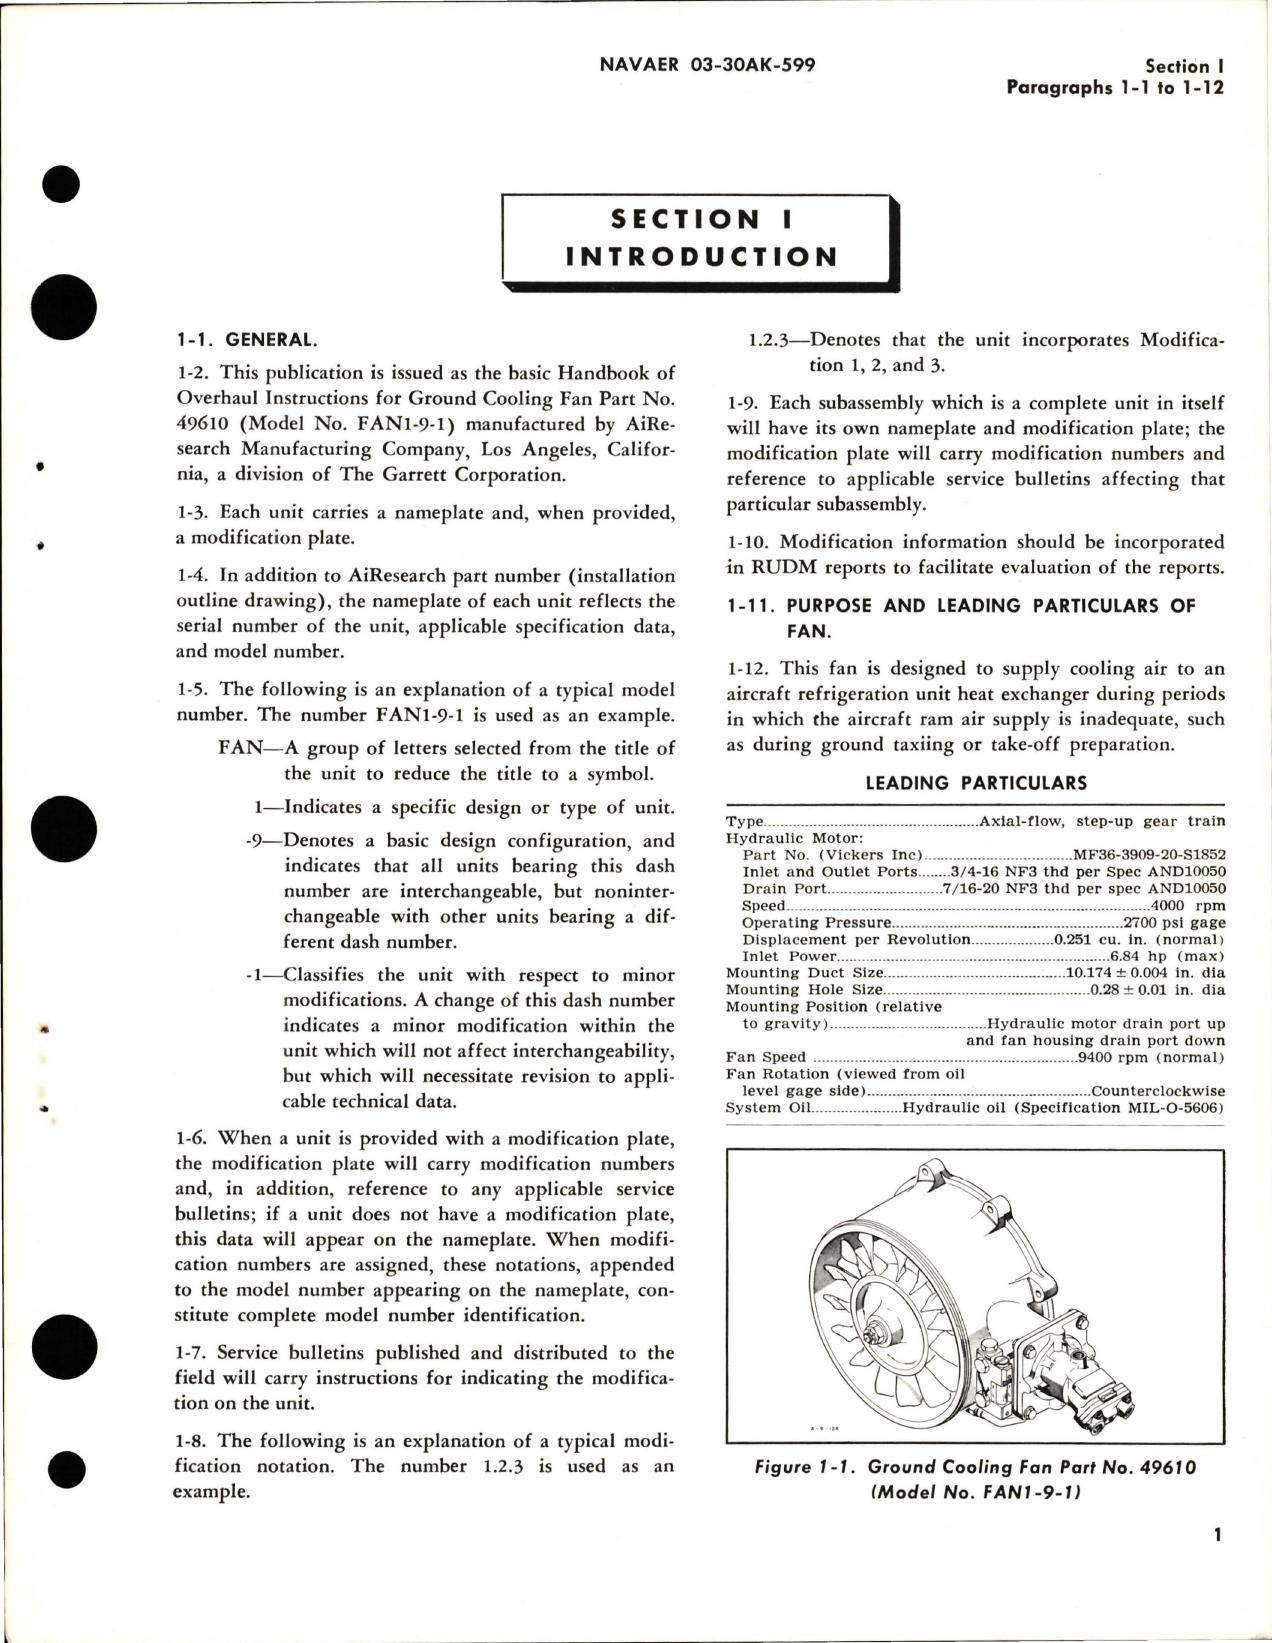 Sample page 5 from AirCorps Library document: Overhaul Instructions for Ground Cooling Fan - Part 49610 - Model FAN1-9